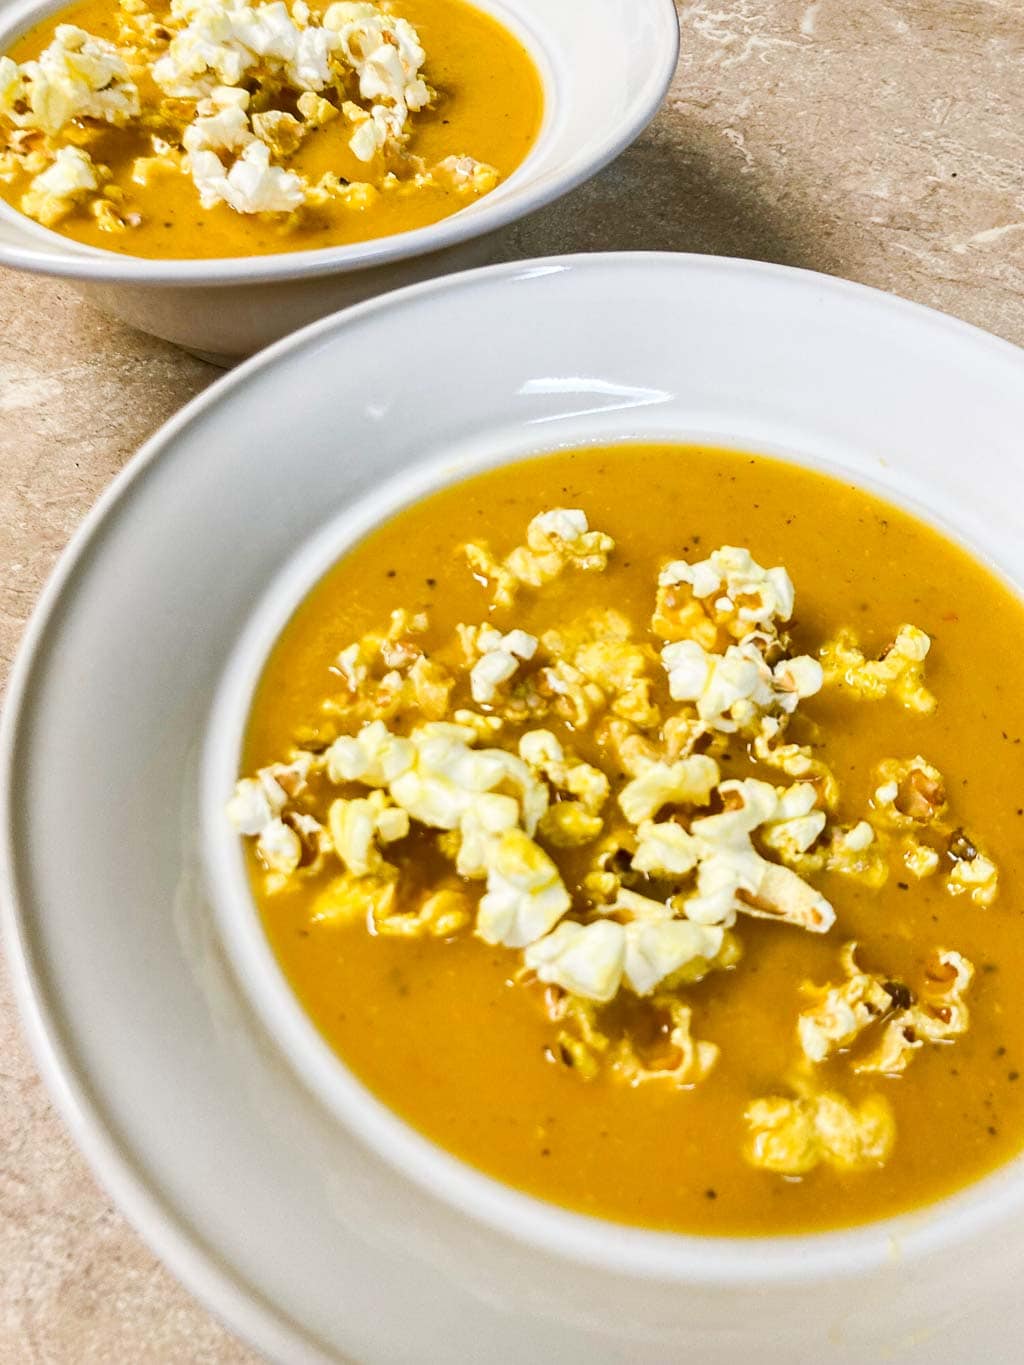 Butternut squash soup with popcorn in bowls